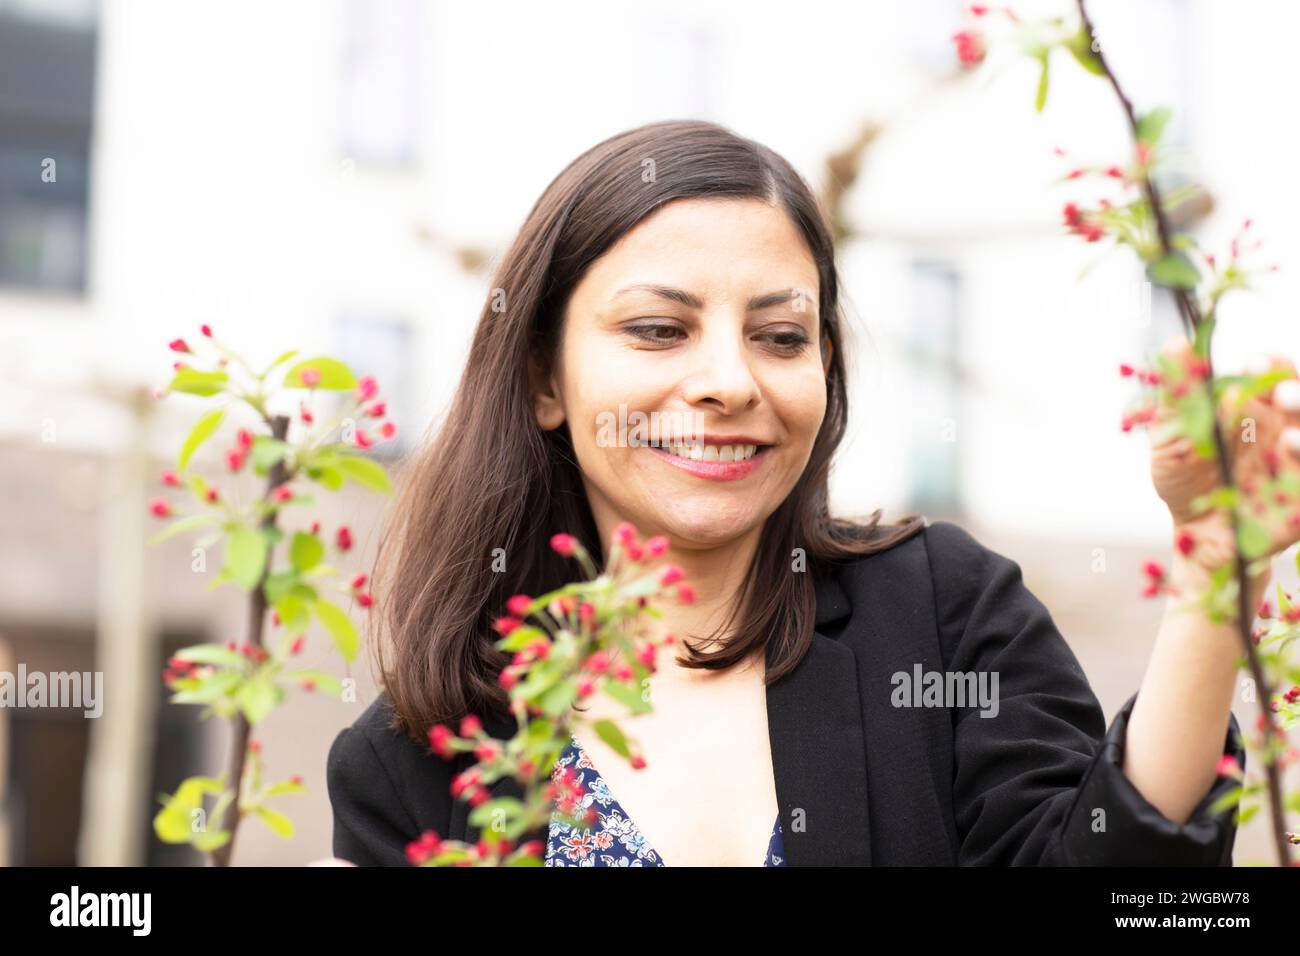 Smiling woman standing in her garden tending to her plants, Germany Stock Photo